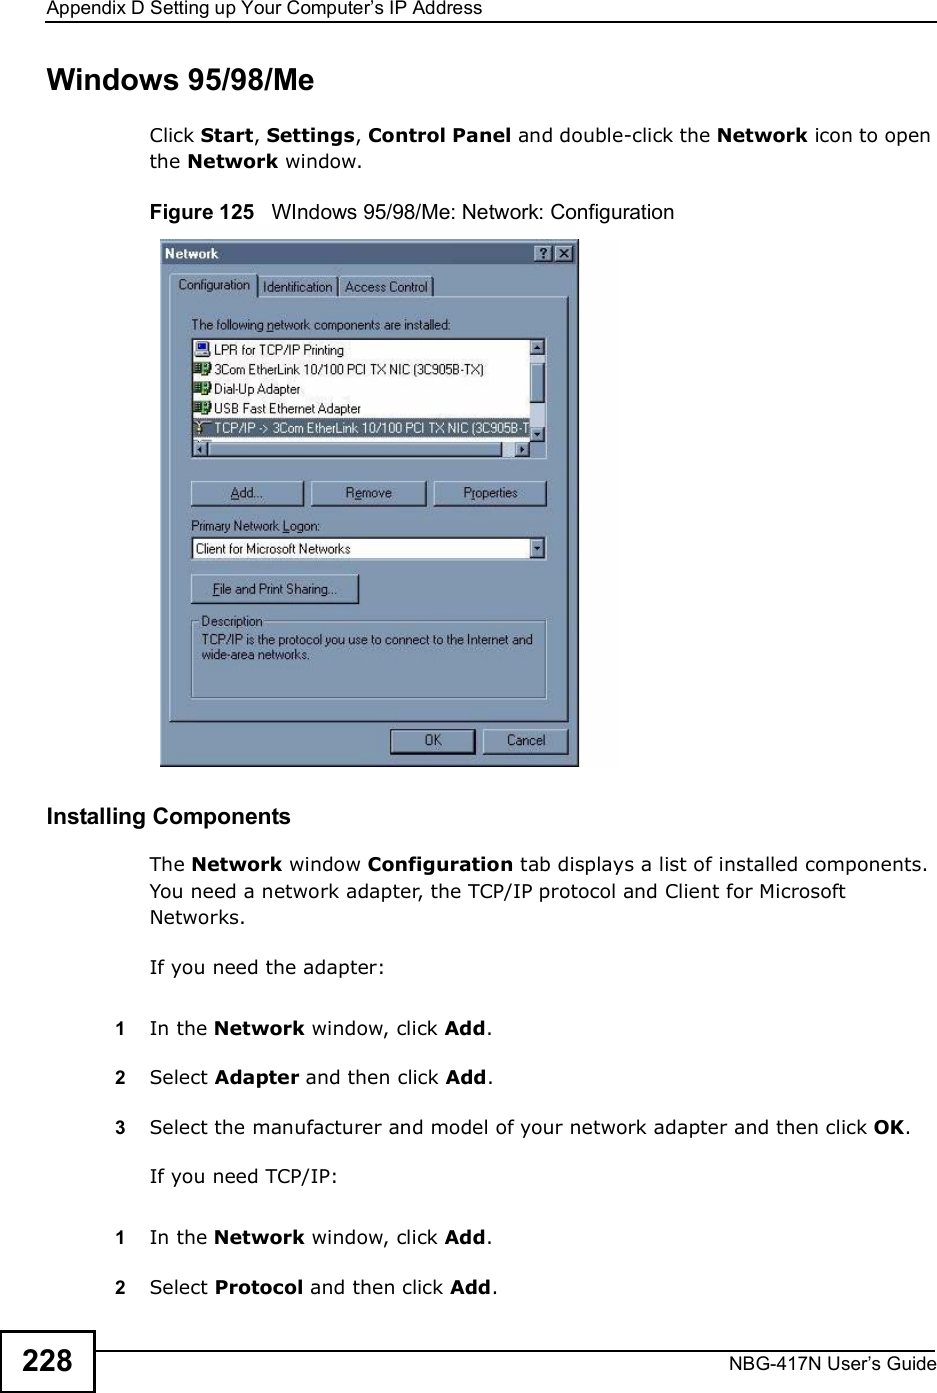 Appendix DSetting up Your Computer s IP AddressNBG-417N User s Guide228Windows 95/98/MeClick Start, Settings, Control Panel and double-click the Network icon to open the Network window.Figure 125   WIndows 95/98/Me: Network: ConfigurationInstalling ComponentsThe Network window Configuration tab displays a list of installed components. You need a network adapter, the TCP/IP protocol and Client for Microsoft Networks.If you need the adapter:1In the Network window, click Add.2Select Adapter and then click Add.3Select the manufacturer and model of your network adapter and then click OK.If you need TCP/IP:1In the Network window, click Add.2Select Protocol and then click Add.